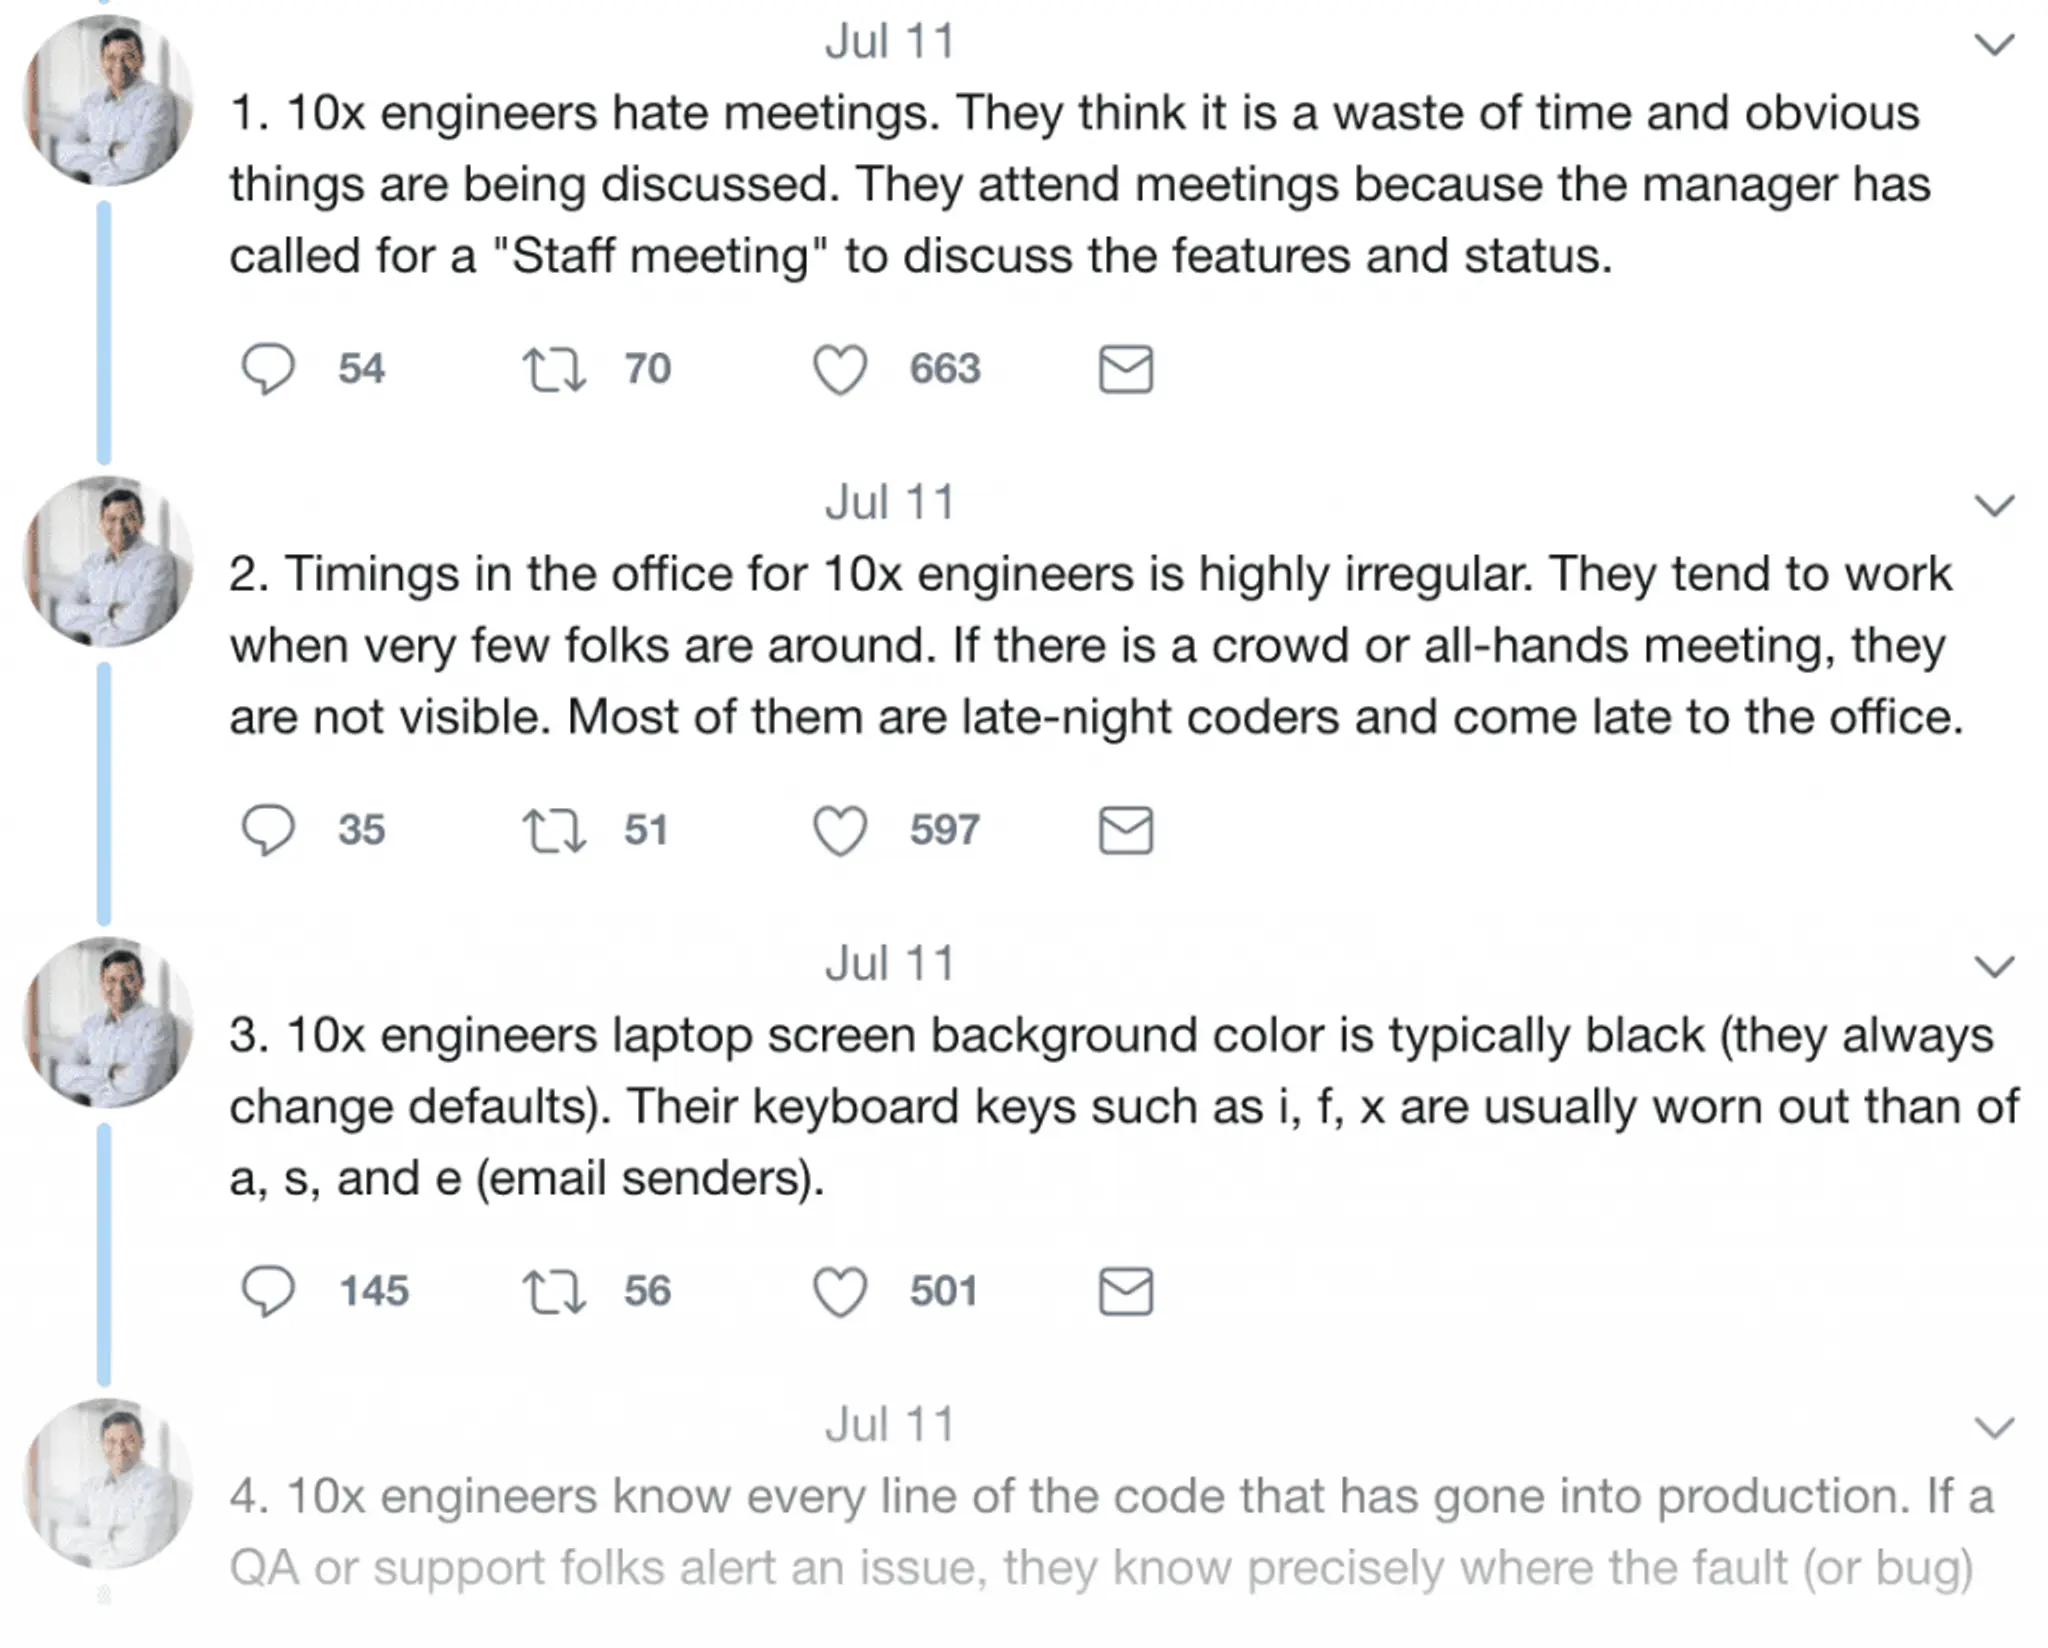 A terrible example image of a 10x engineer, completely wrong